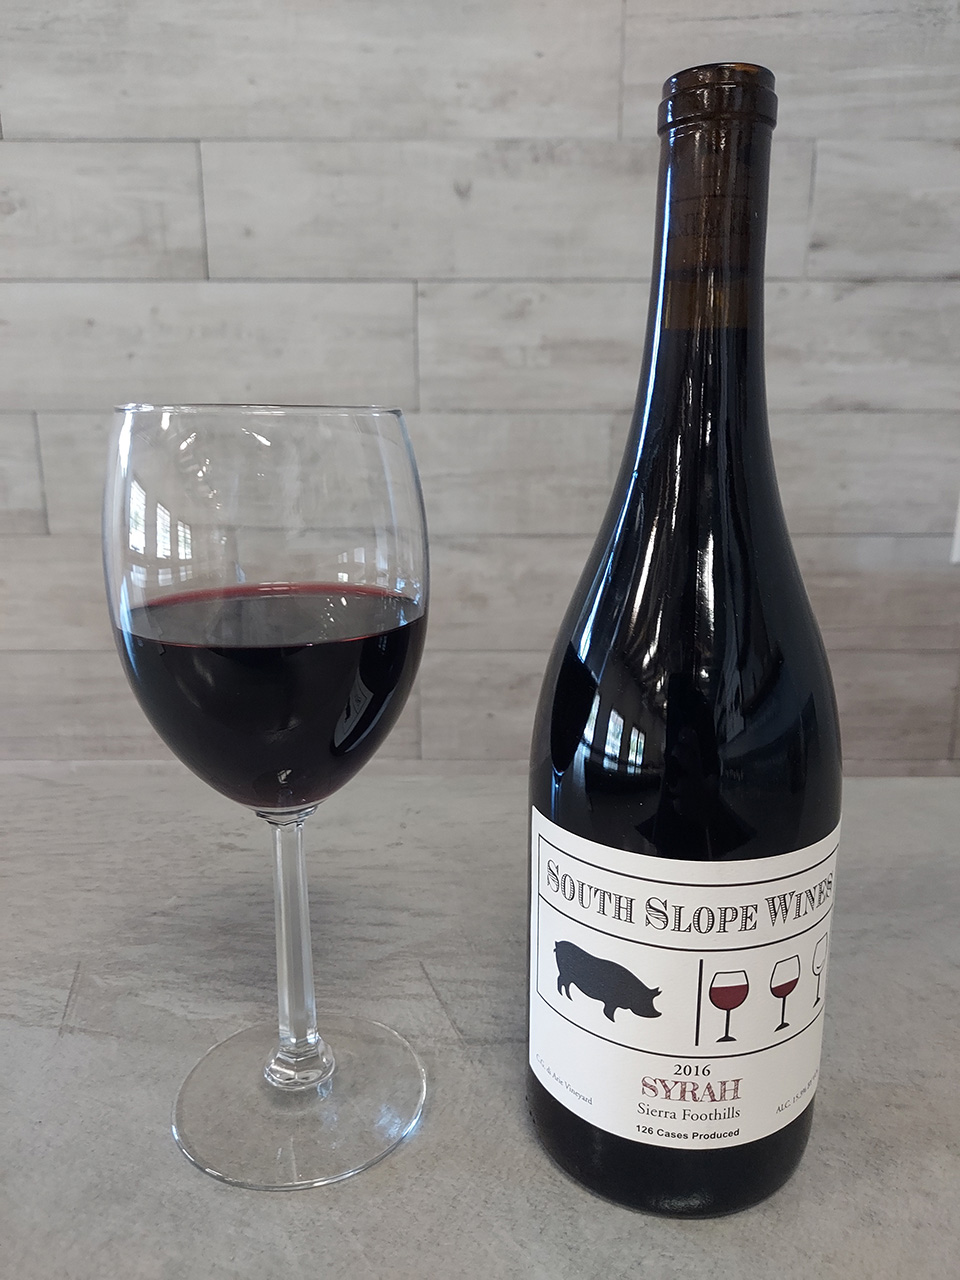 Product Image for 2016 Syrah